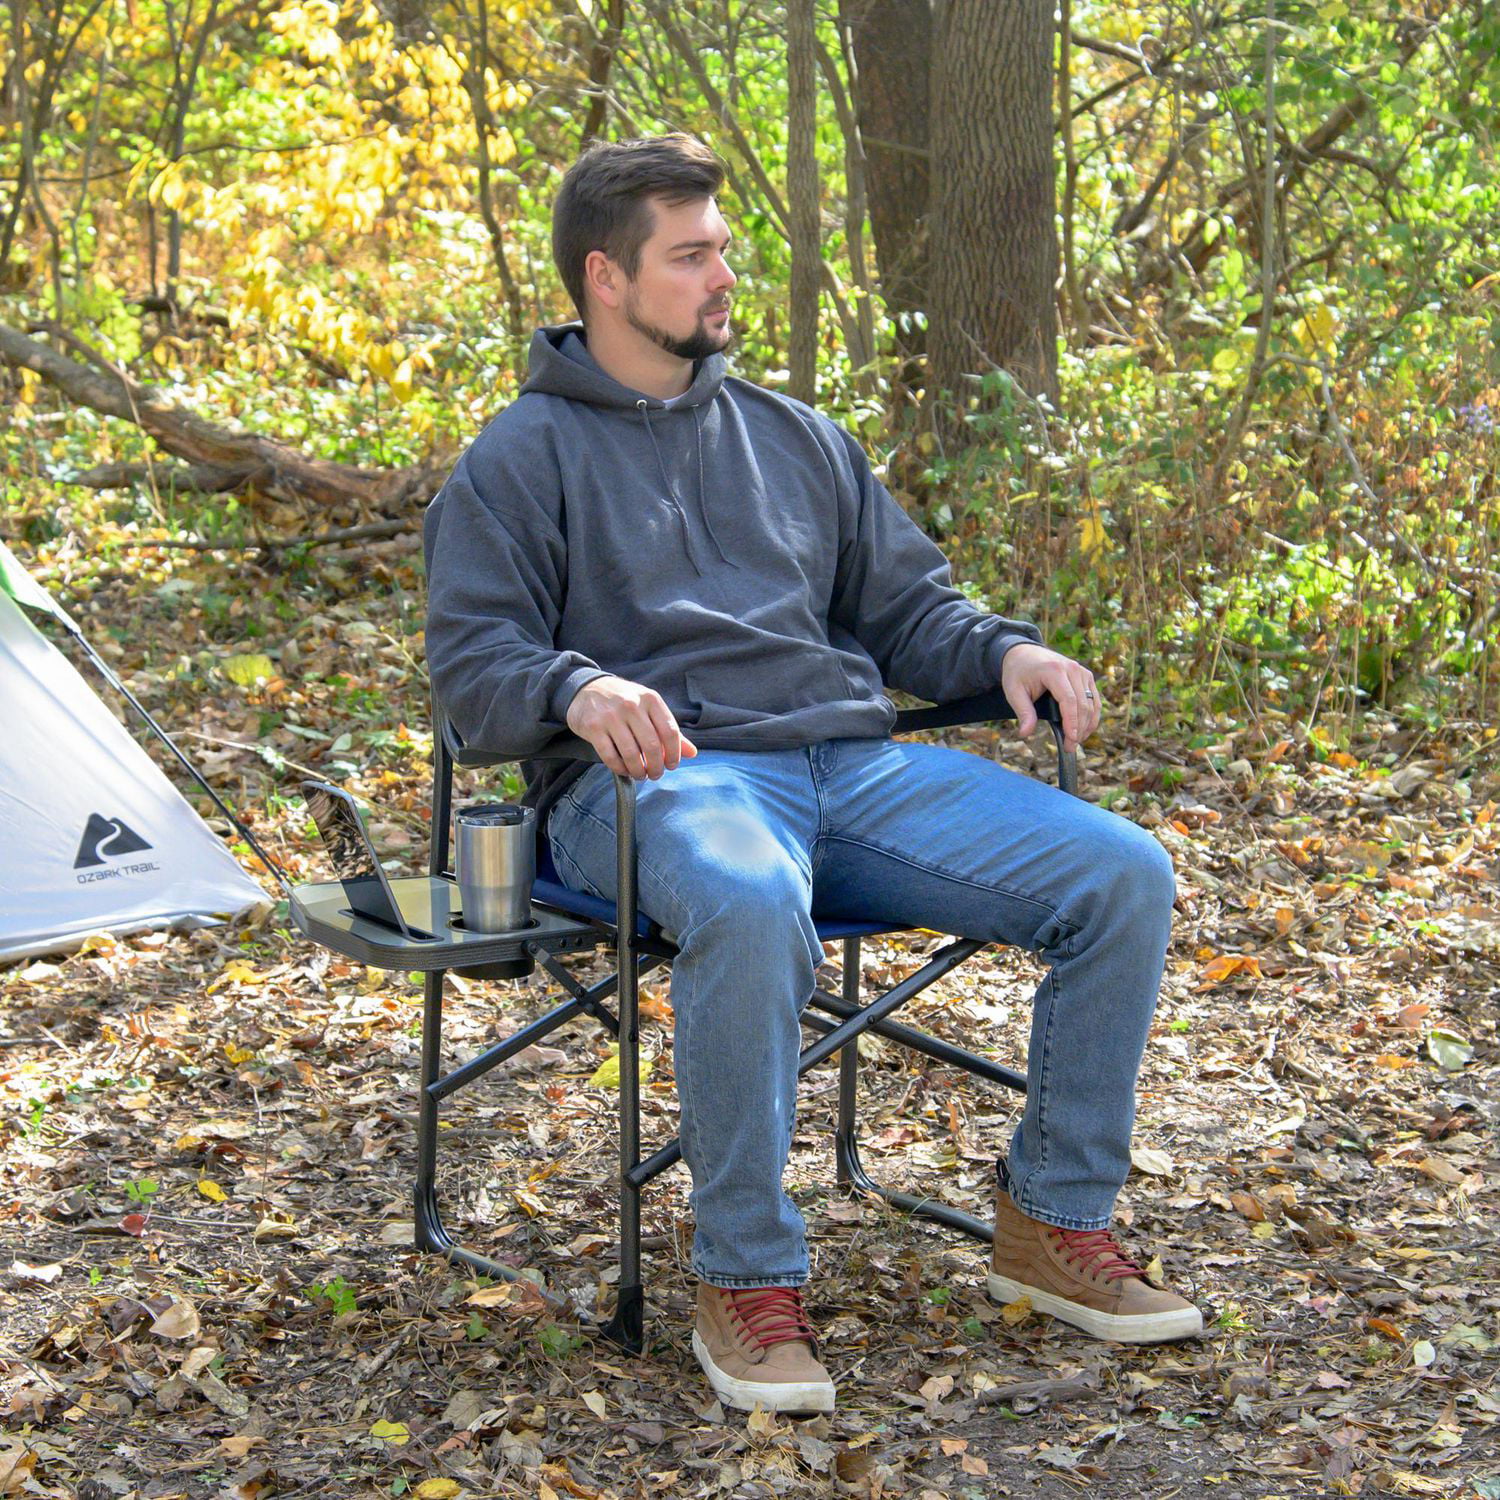 Ozark Trail XXL Folding Padded Director Chair with Side Table Red